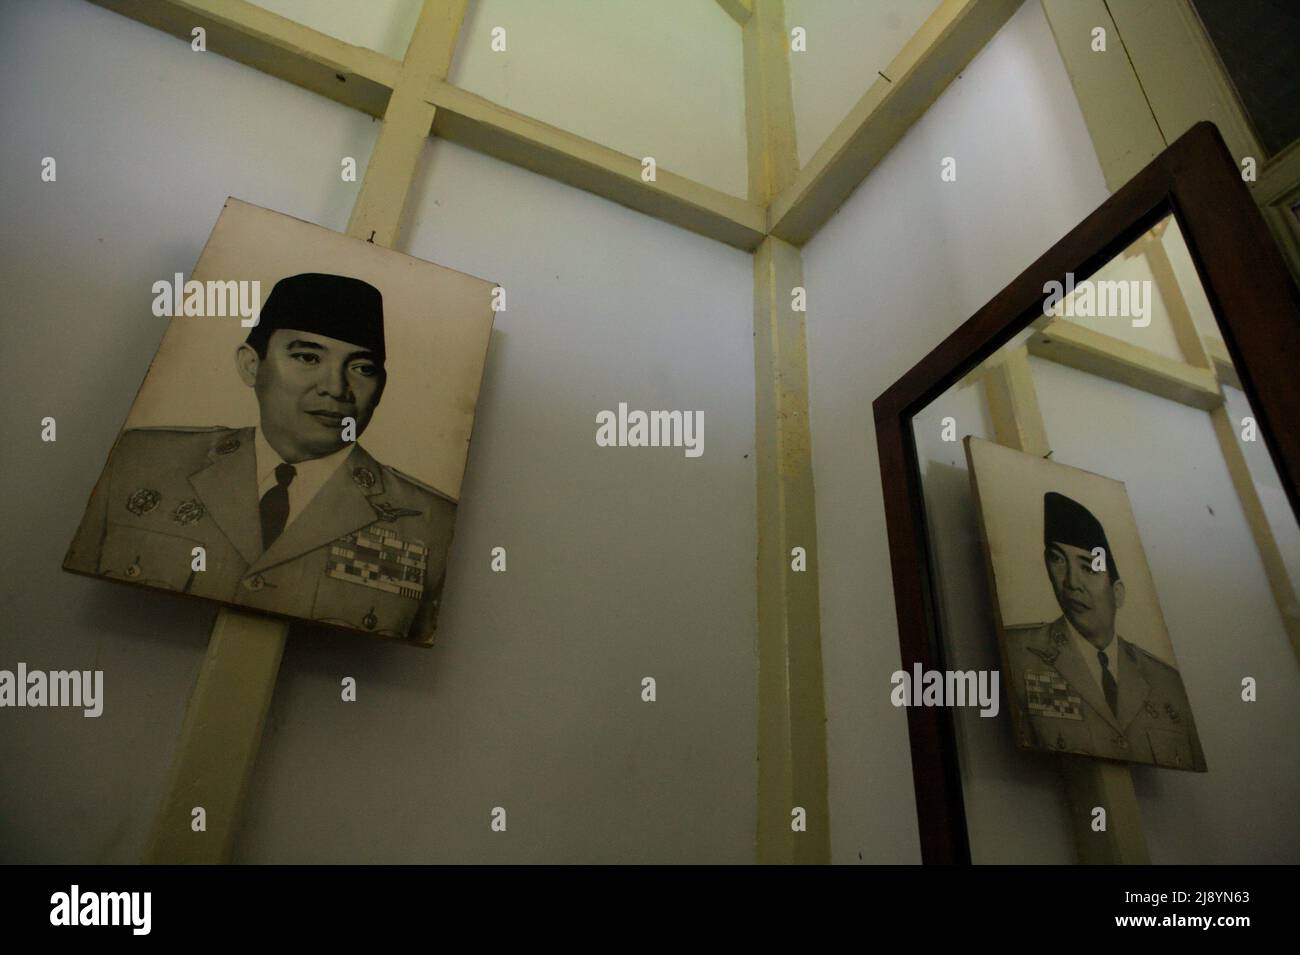 Printed photo of Indonesian first president Soekarno in a bedroom where he spent his exile time several years during colonial period at a house which is now a museum in Bengkulu, Indonesia. Stock Photo